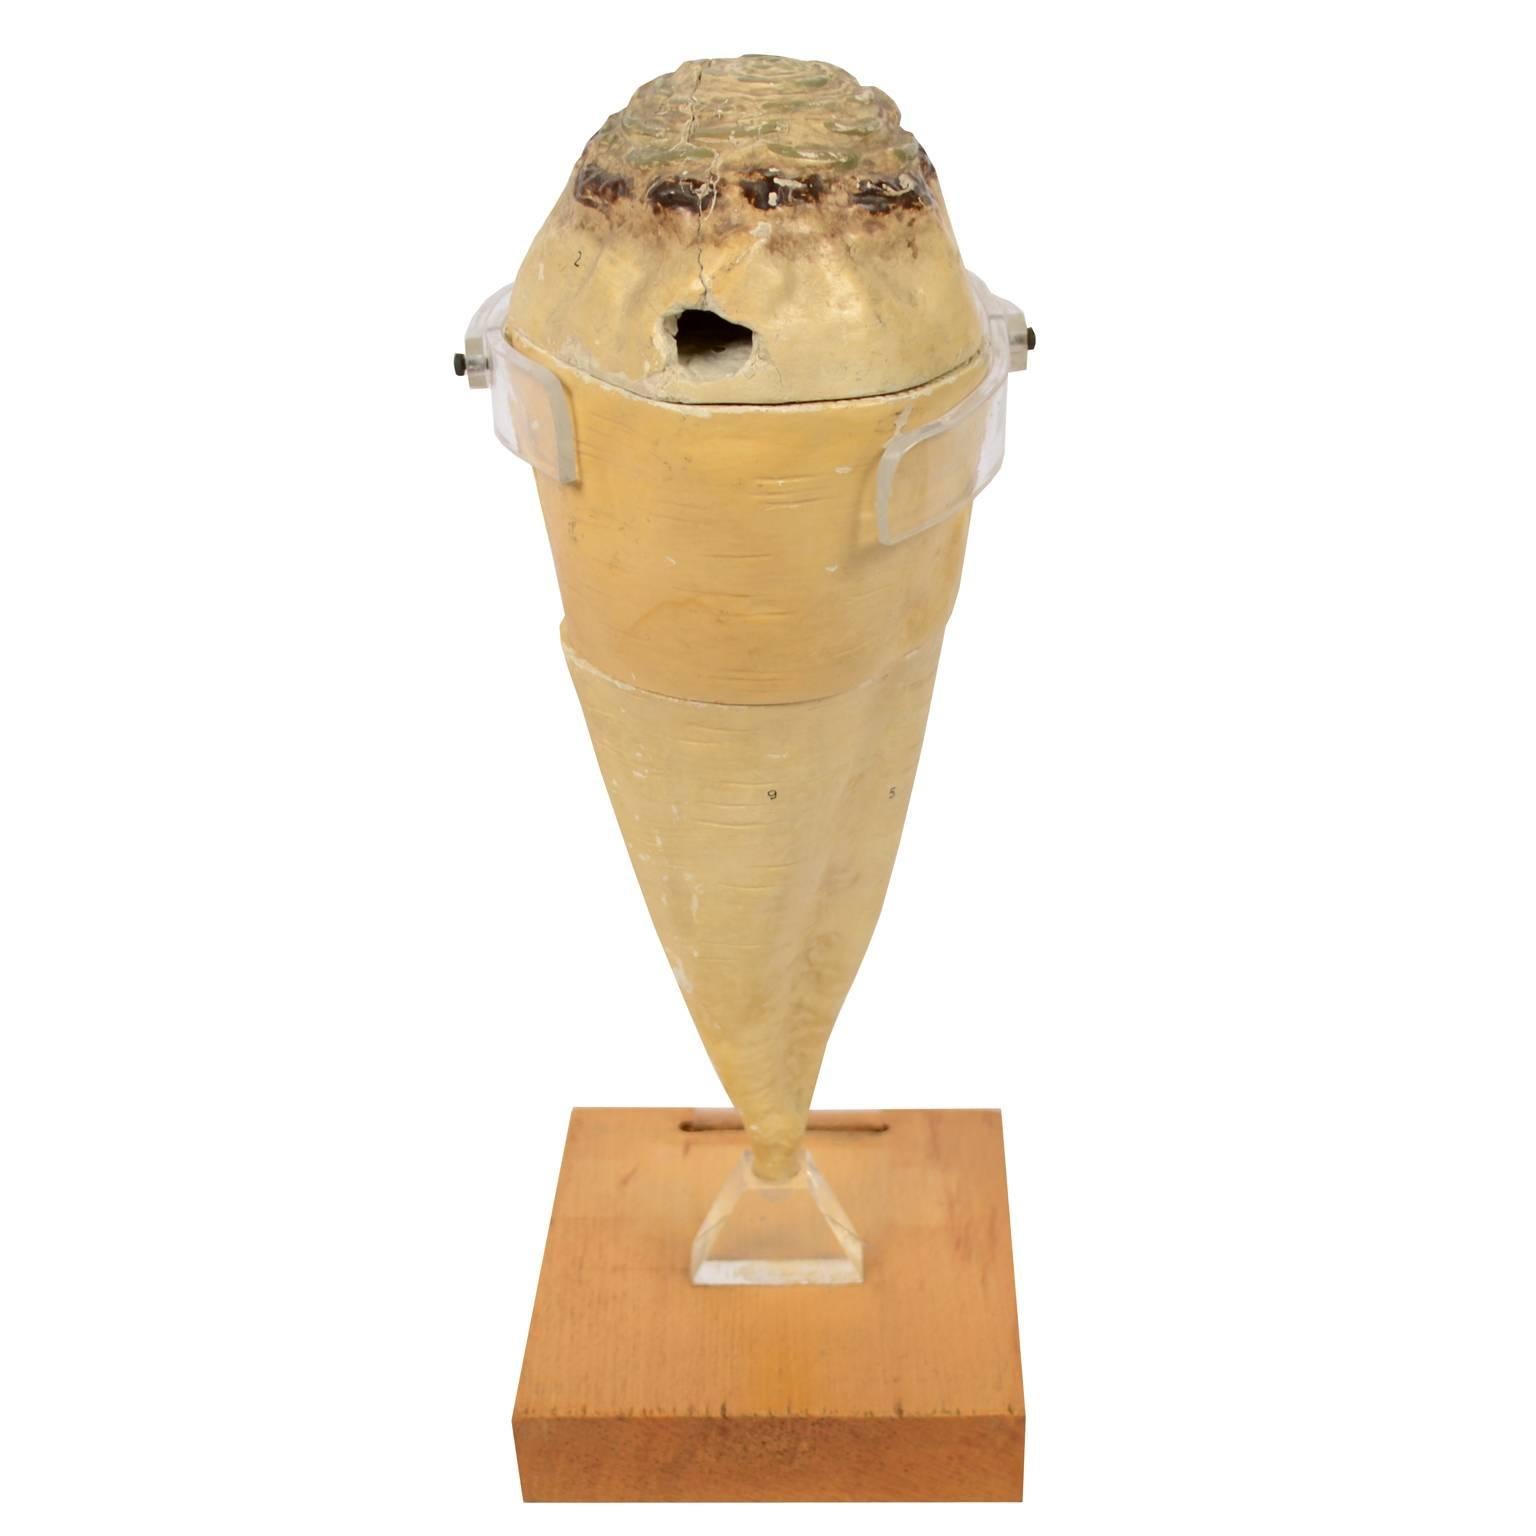 Botanical model of a sugar beet made of painted plaster and divided into three sections, mounted on wooden and Lucite base. The sections are numbered. German manufacture of the early 1900s. Measures: Height with base cm 36, base cm 15.5 x